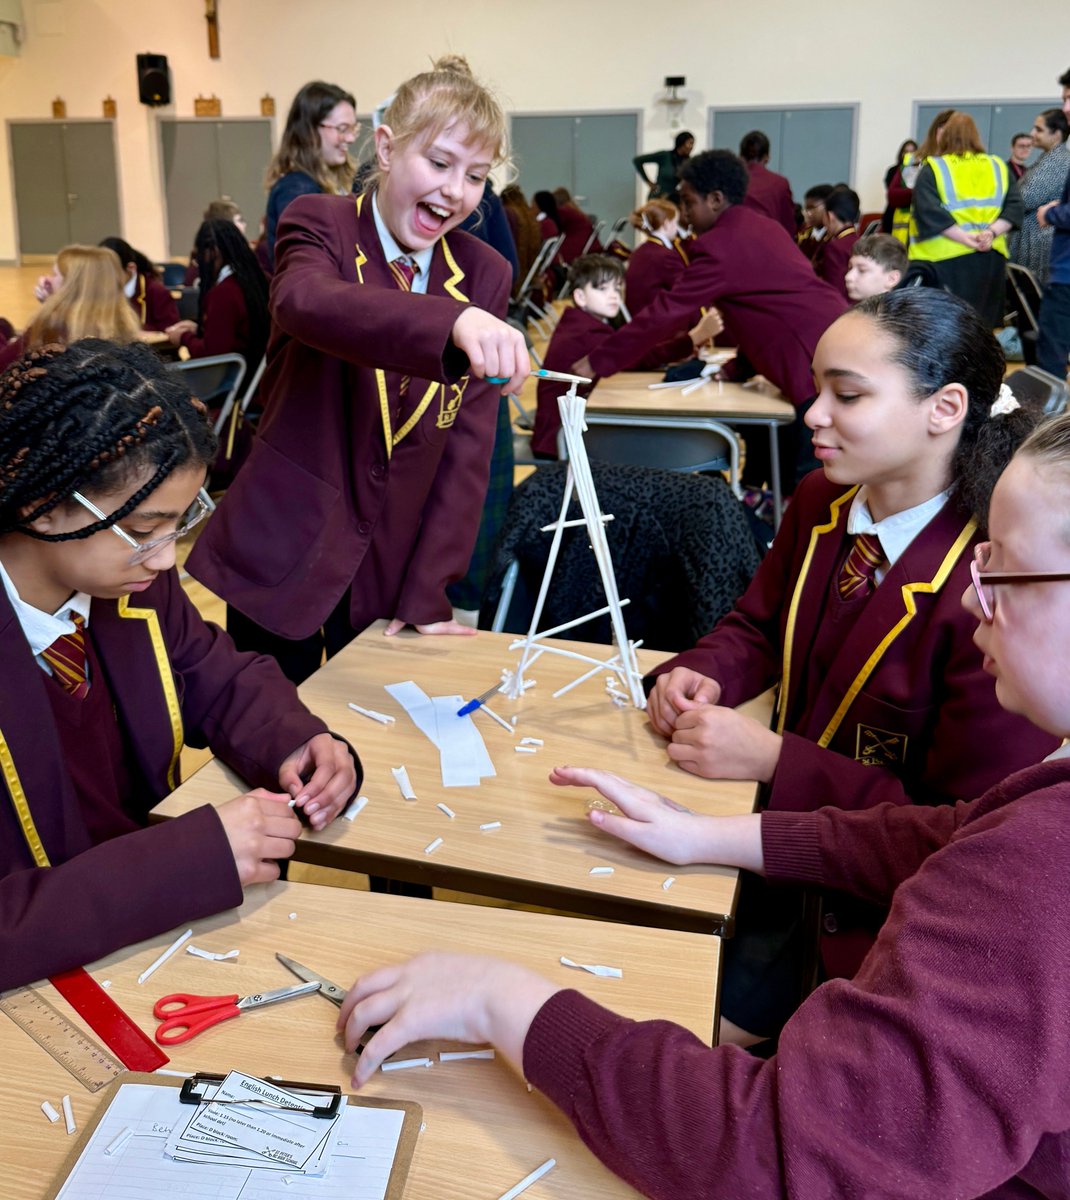 Today, Year 7 students took part in an interactive workshop led by @TheEDTUK. The workshop focused on strong structures and bridges. They were then tasked with collaborating and utilising their problem-solving abilities to construct rollercoasters together. #stem